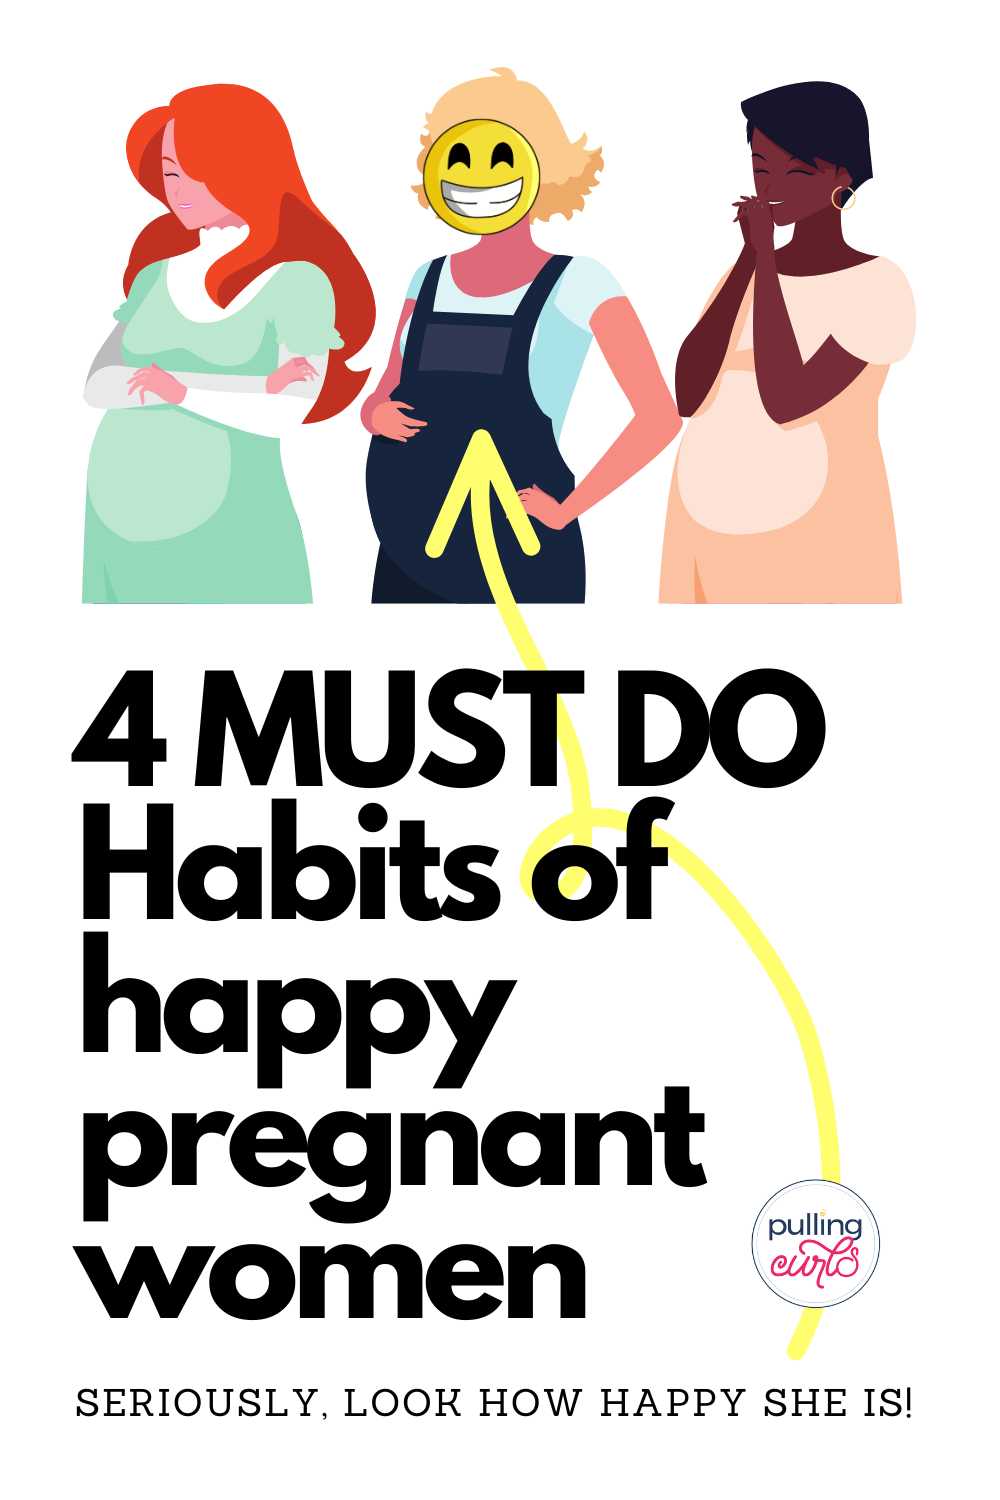 Discover the top 💖 habits of a happy pregnancy! Learn how to relax, nourish yourself, and enjoy your growing bump. 🤰 From morning routines to prenatal yoga, we've got you covered! 😊 via @pullingcurls